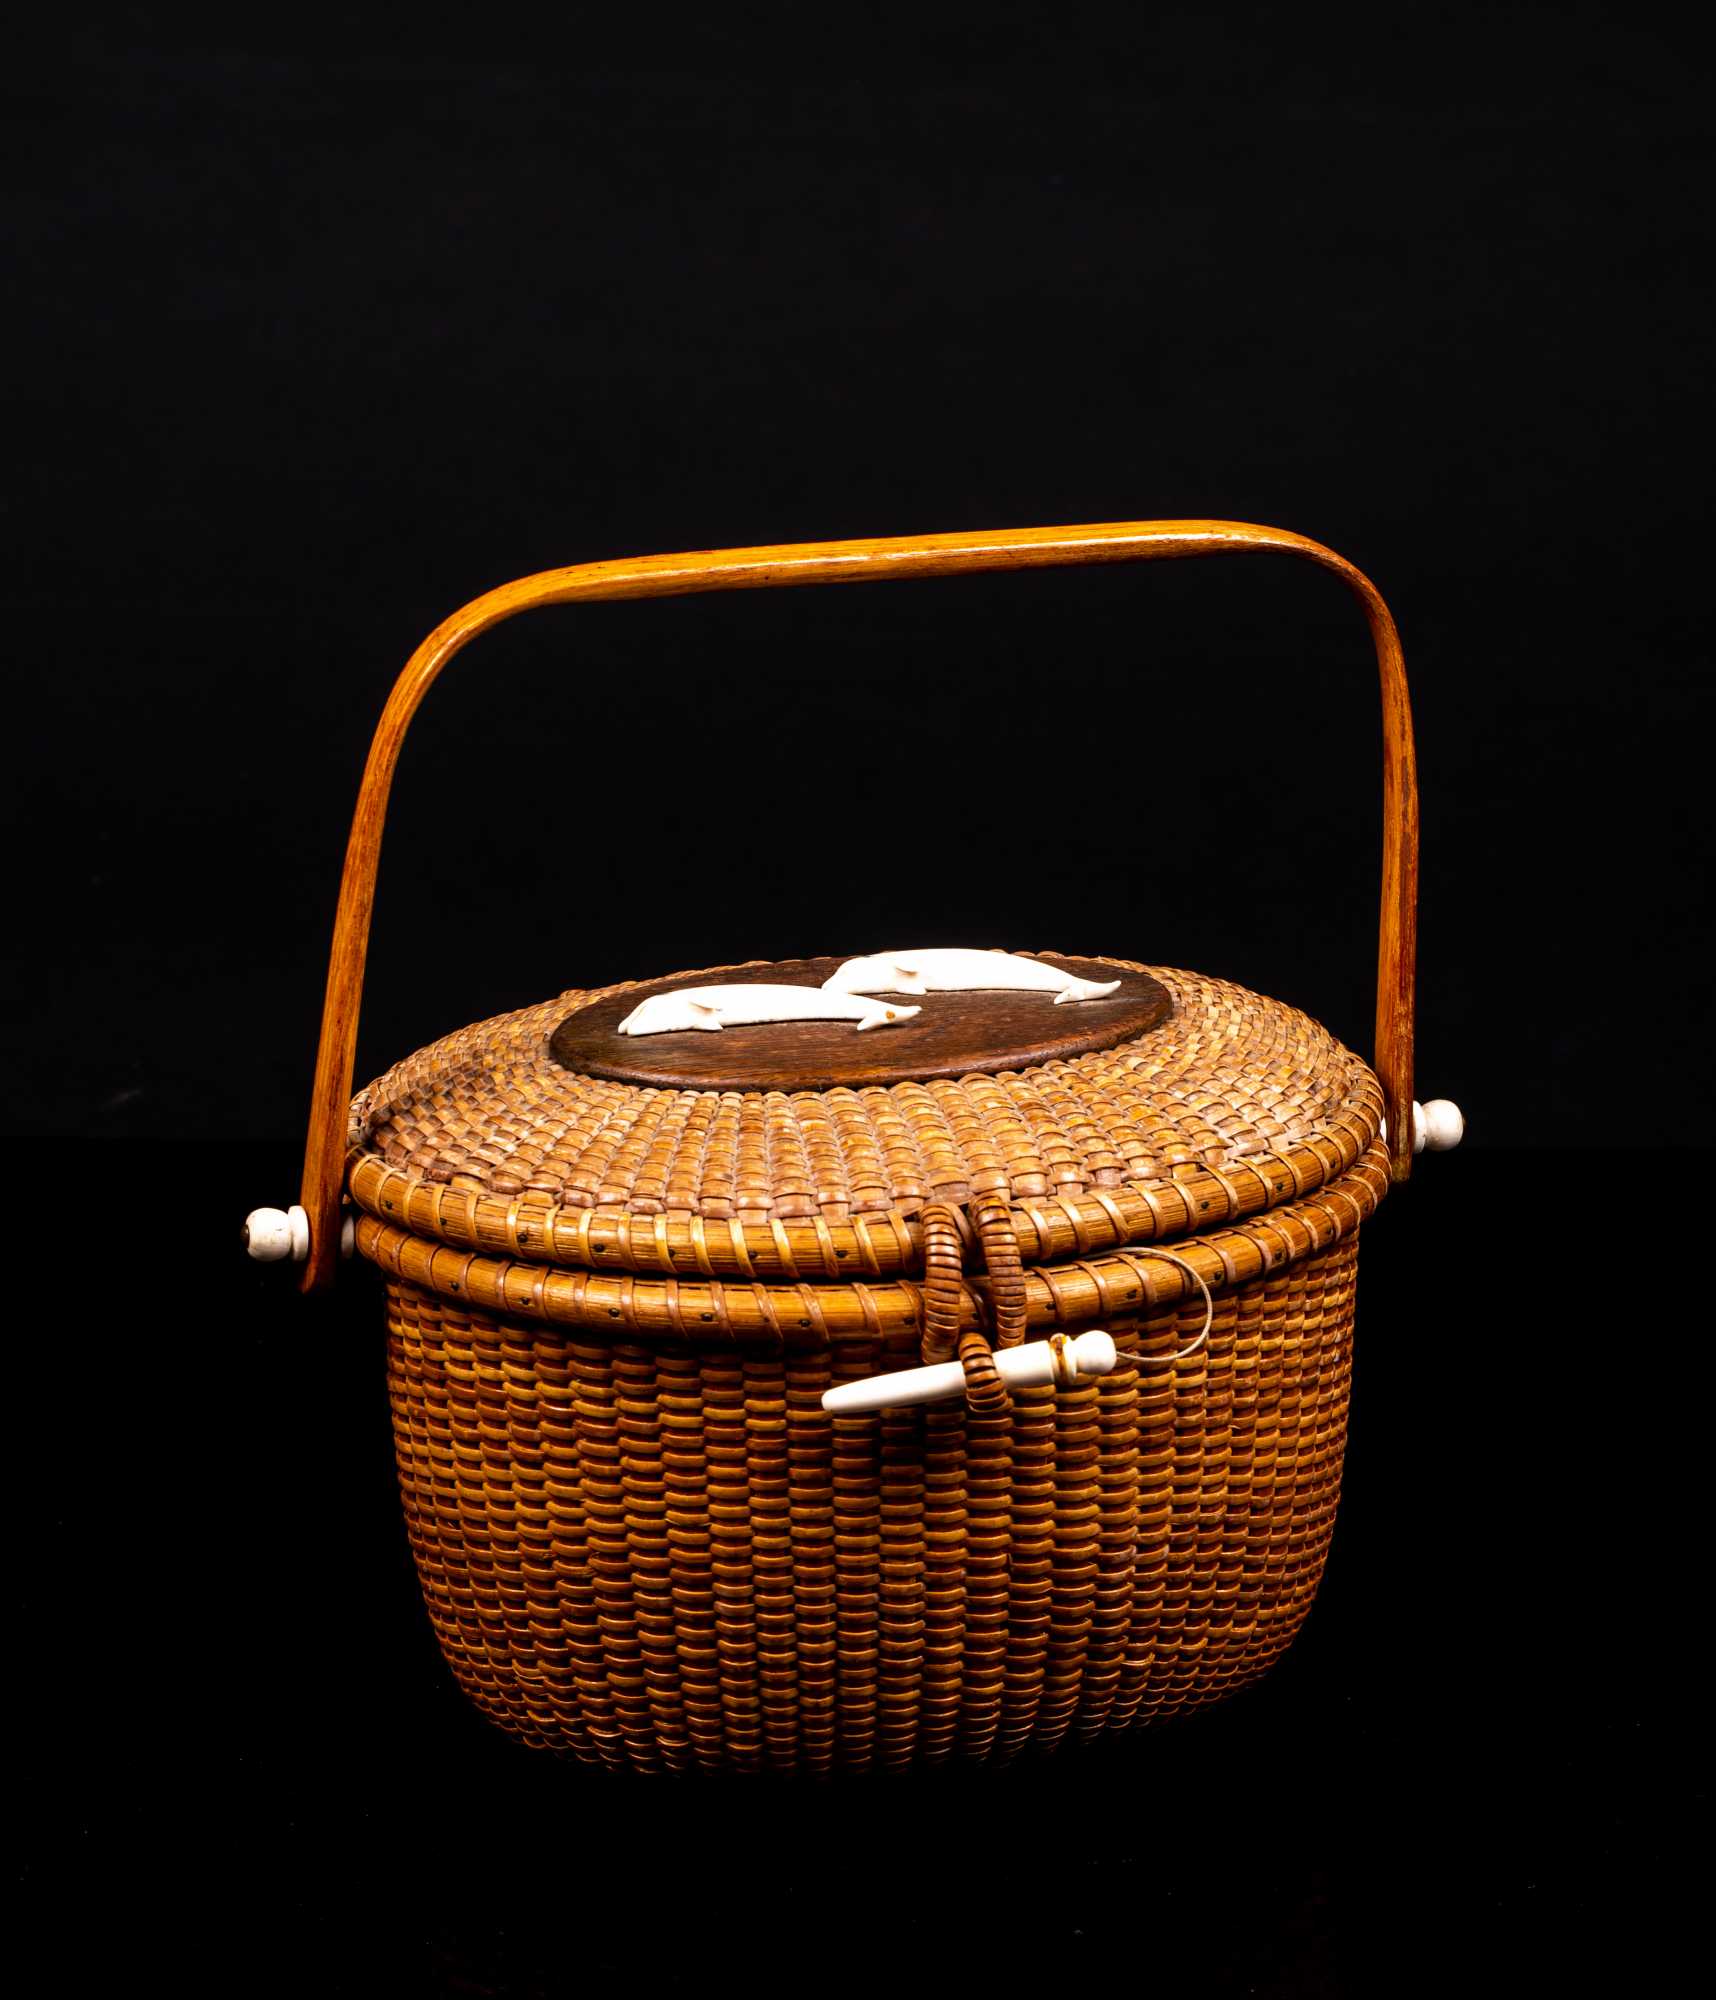 Revival Period 1940-1980s – History of Nantucket Baskets